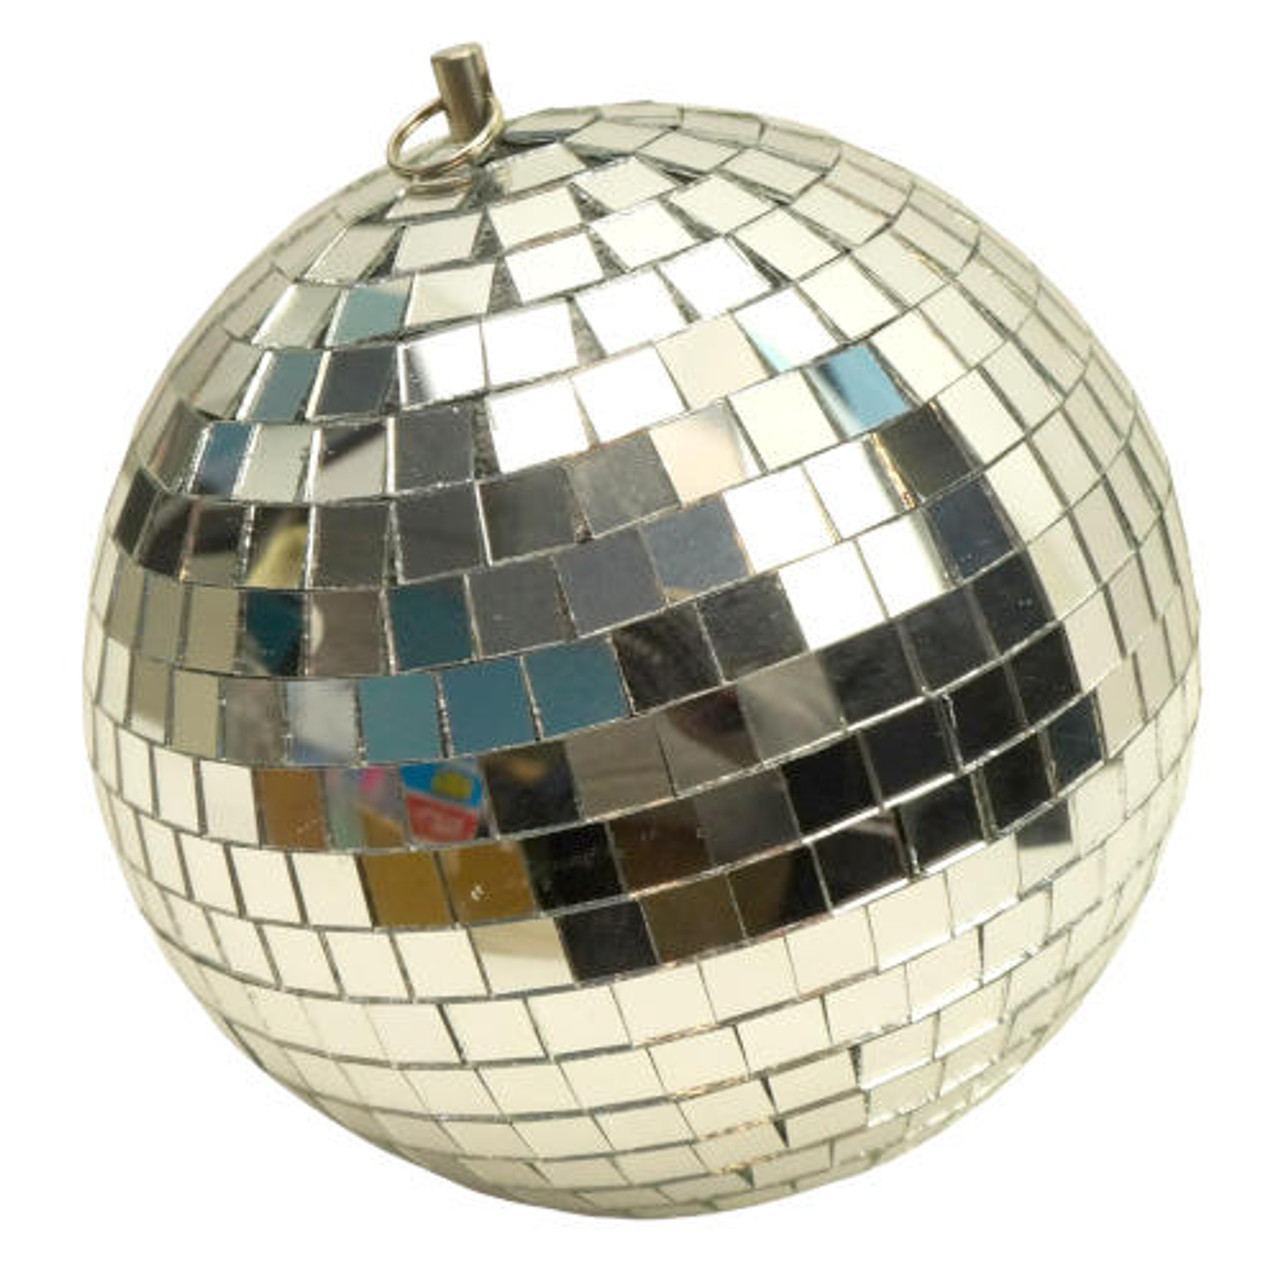 Unique Bargains 8 Inches Party Reflective Hanging Ring Mirror Ball